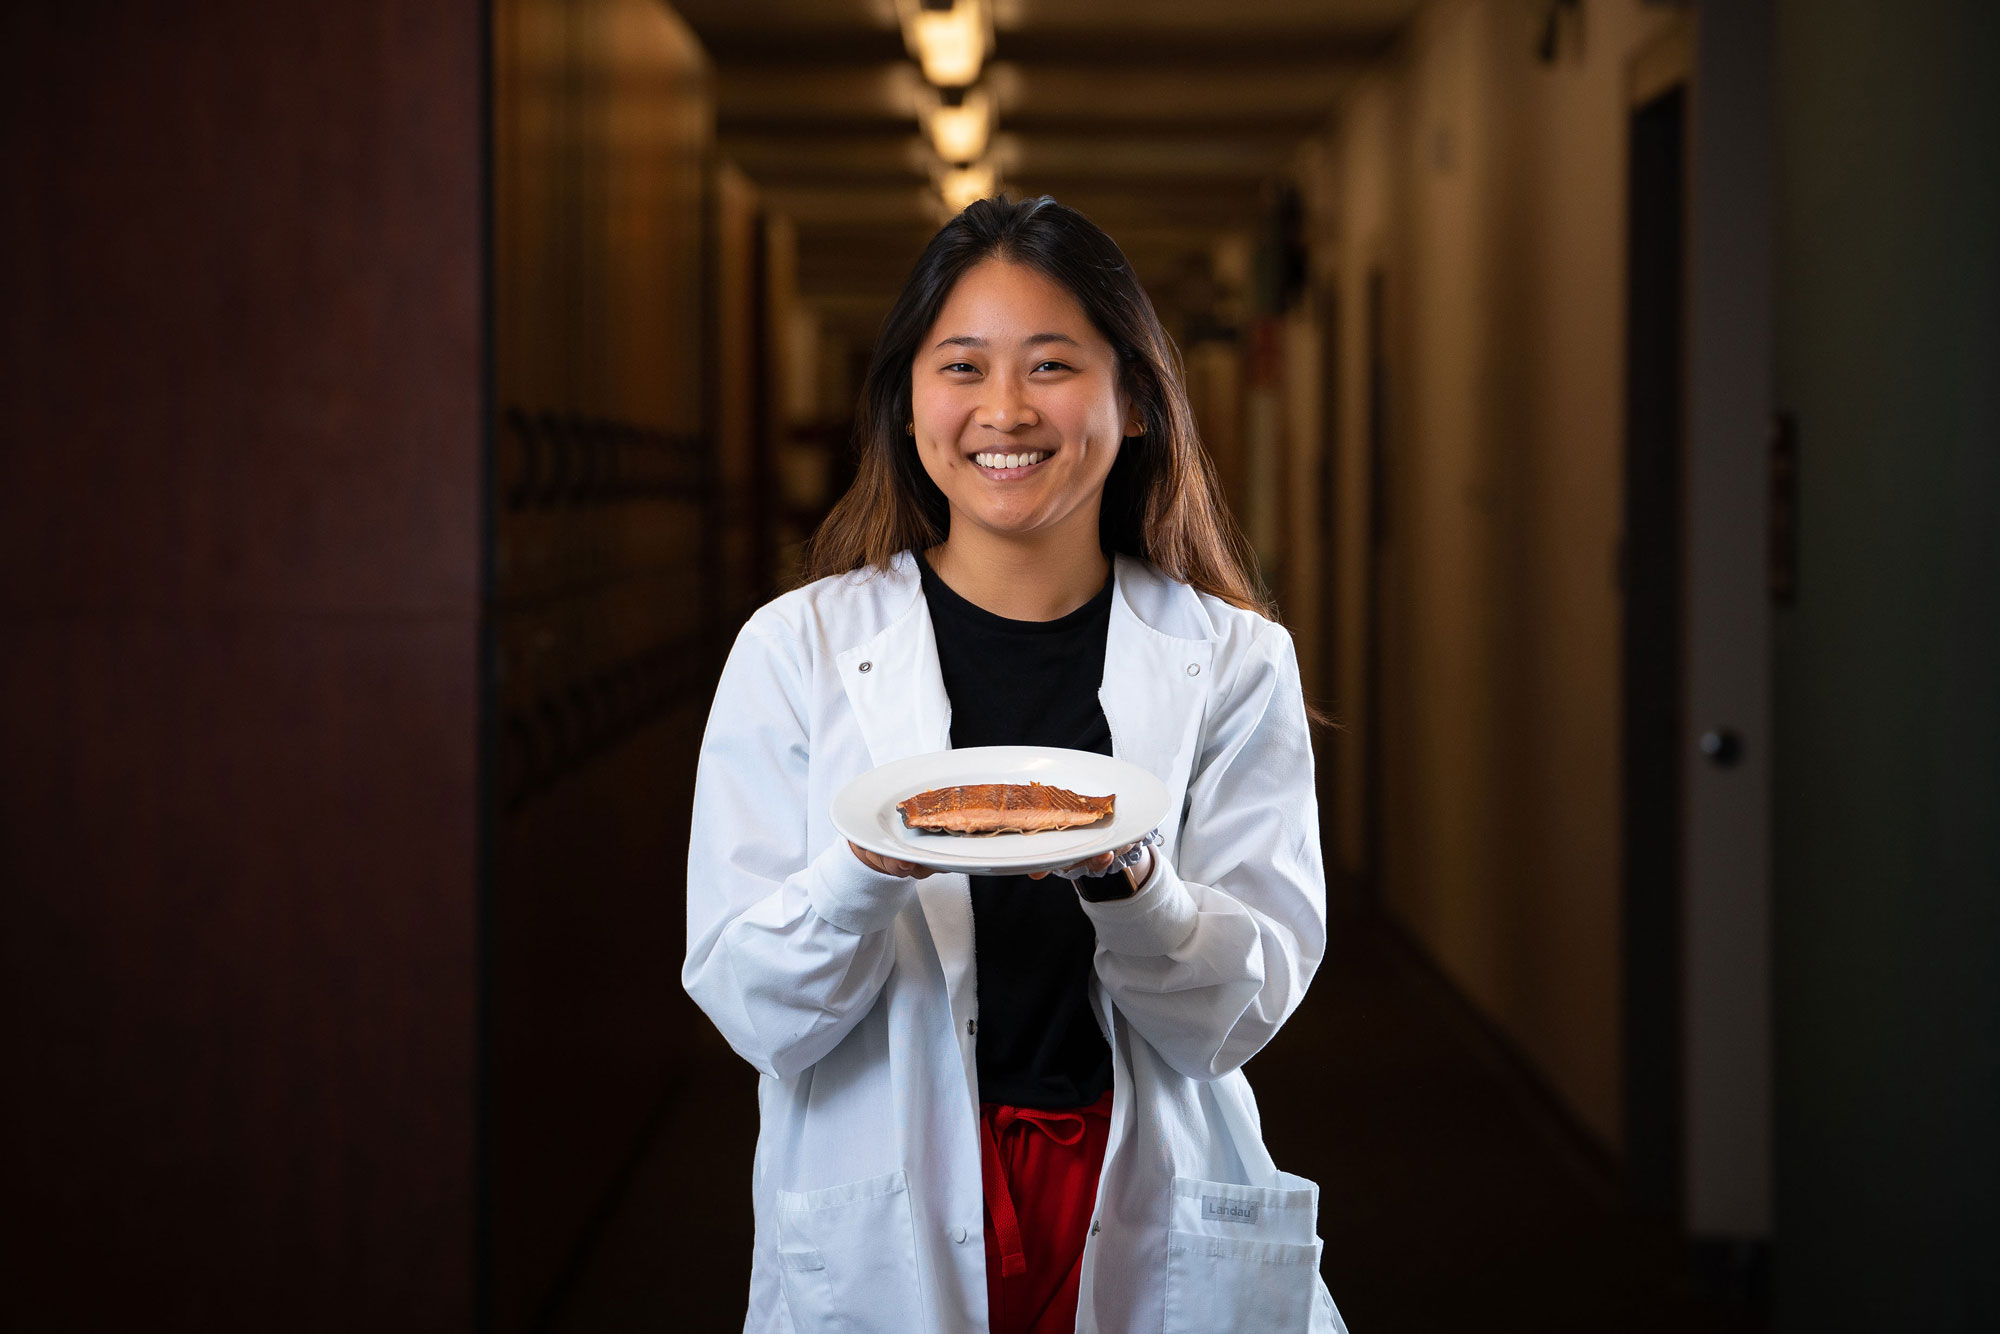 nursing student holding a plate with a salmon filet